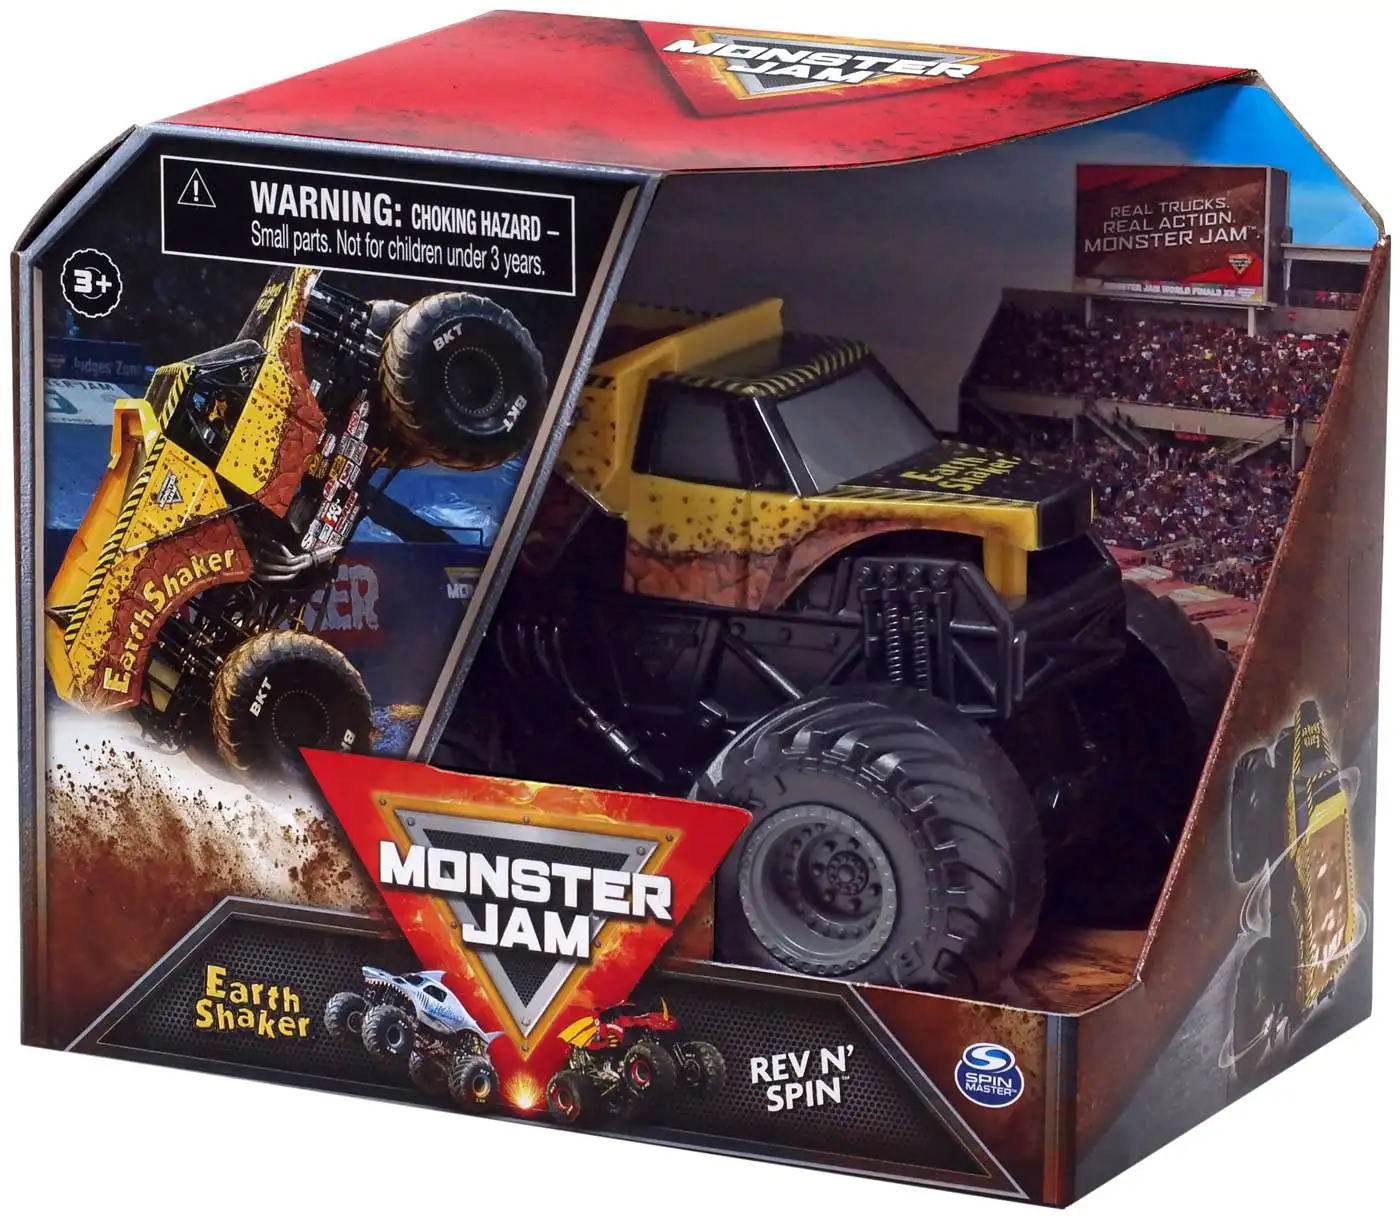 MONSTER JAM Advent Calendar Day 7: Snow Tires Earth Shaker! Which one